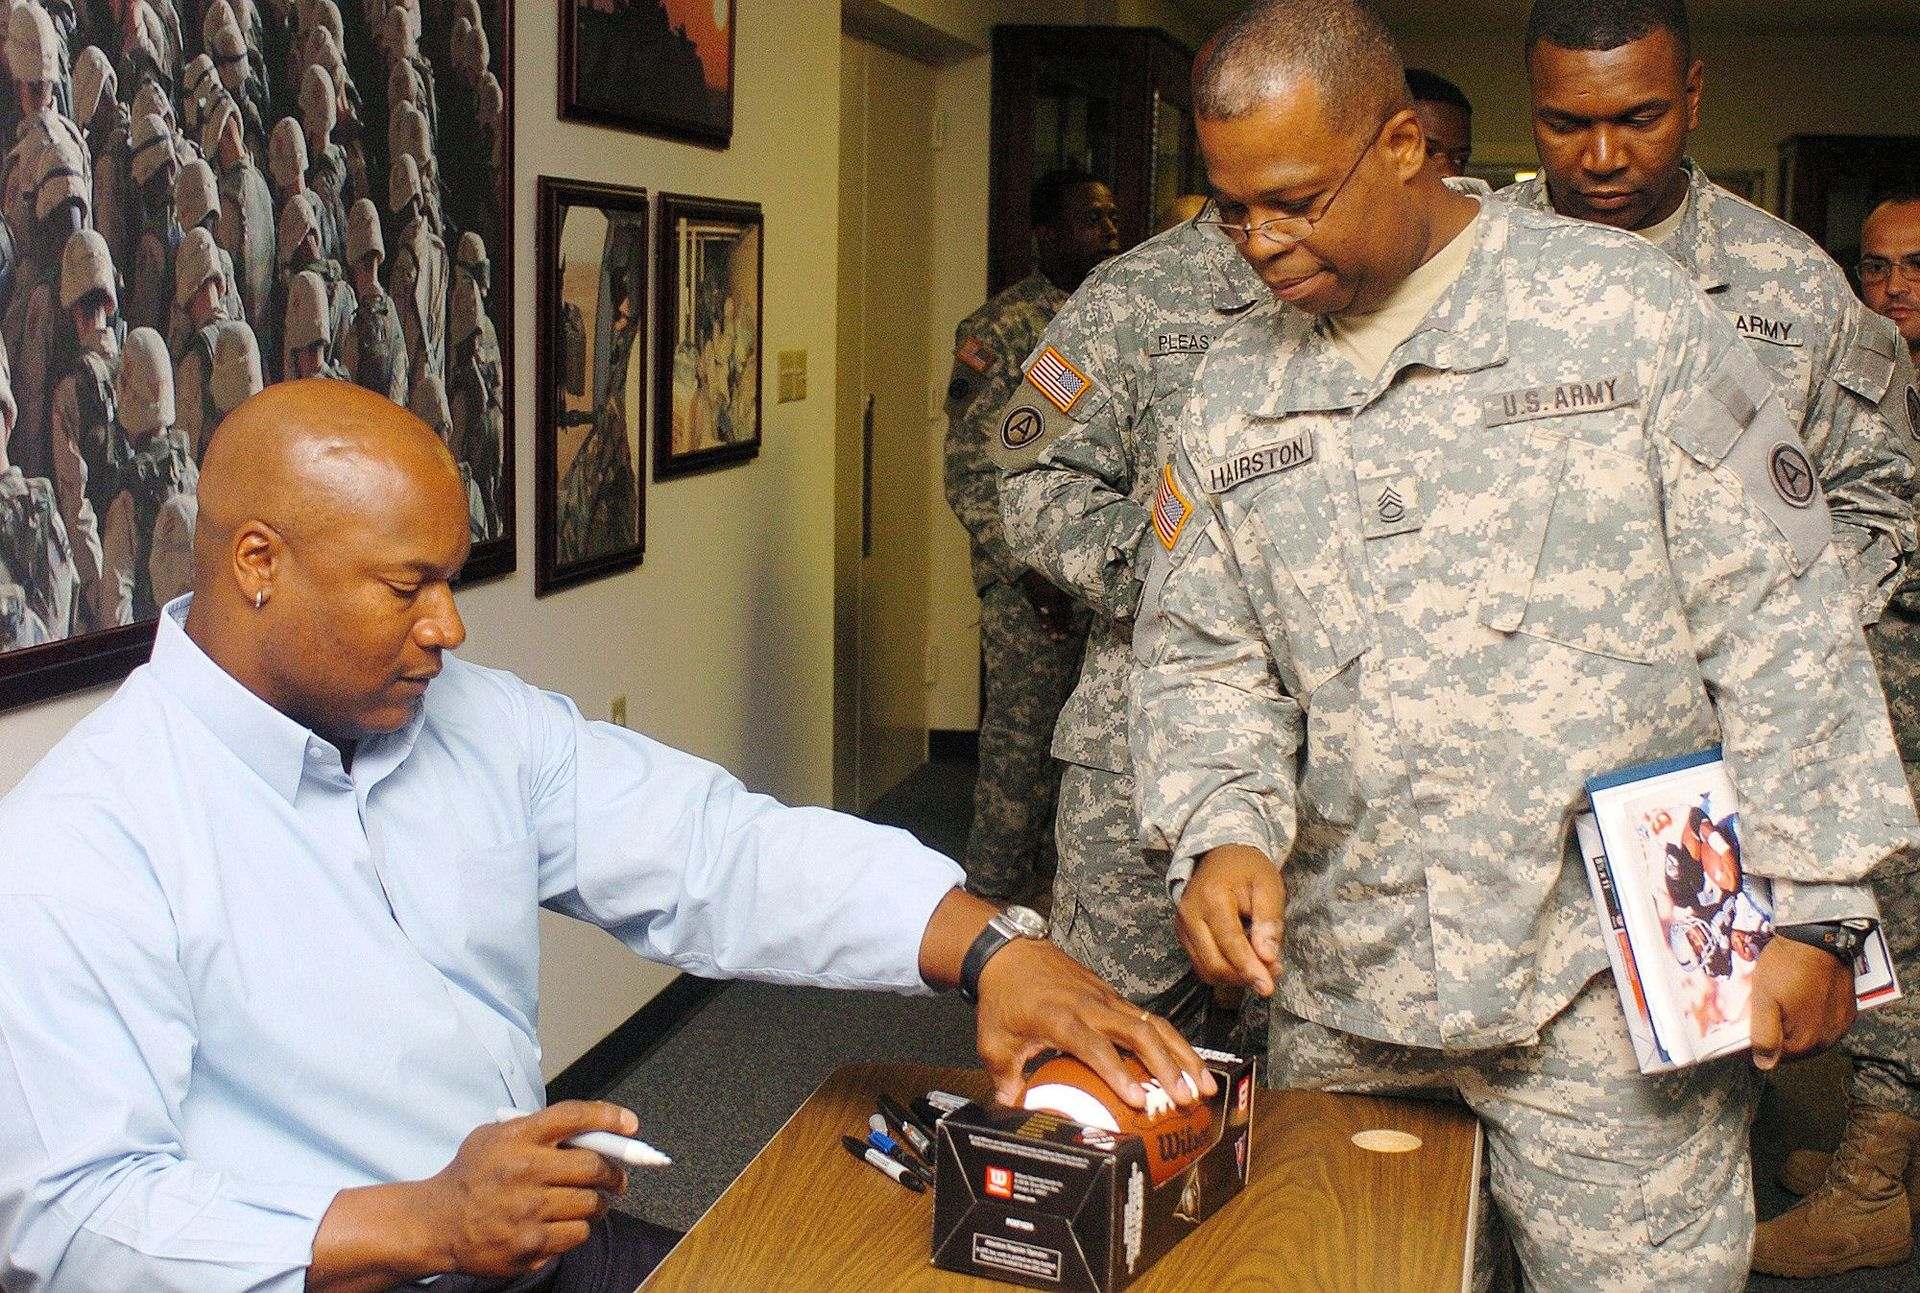 Bo Jackson signing autographs for American soldiers in September 2007